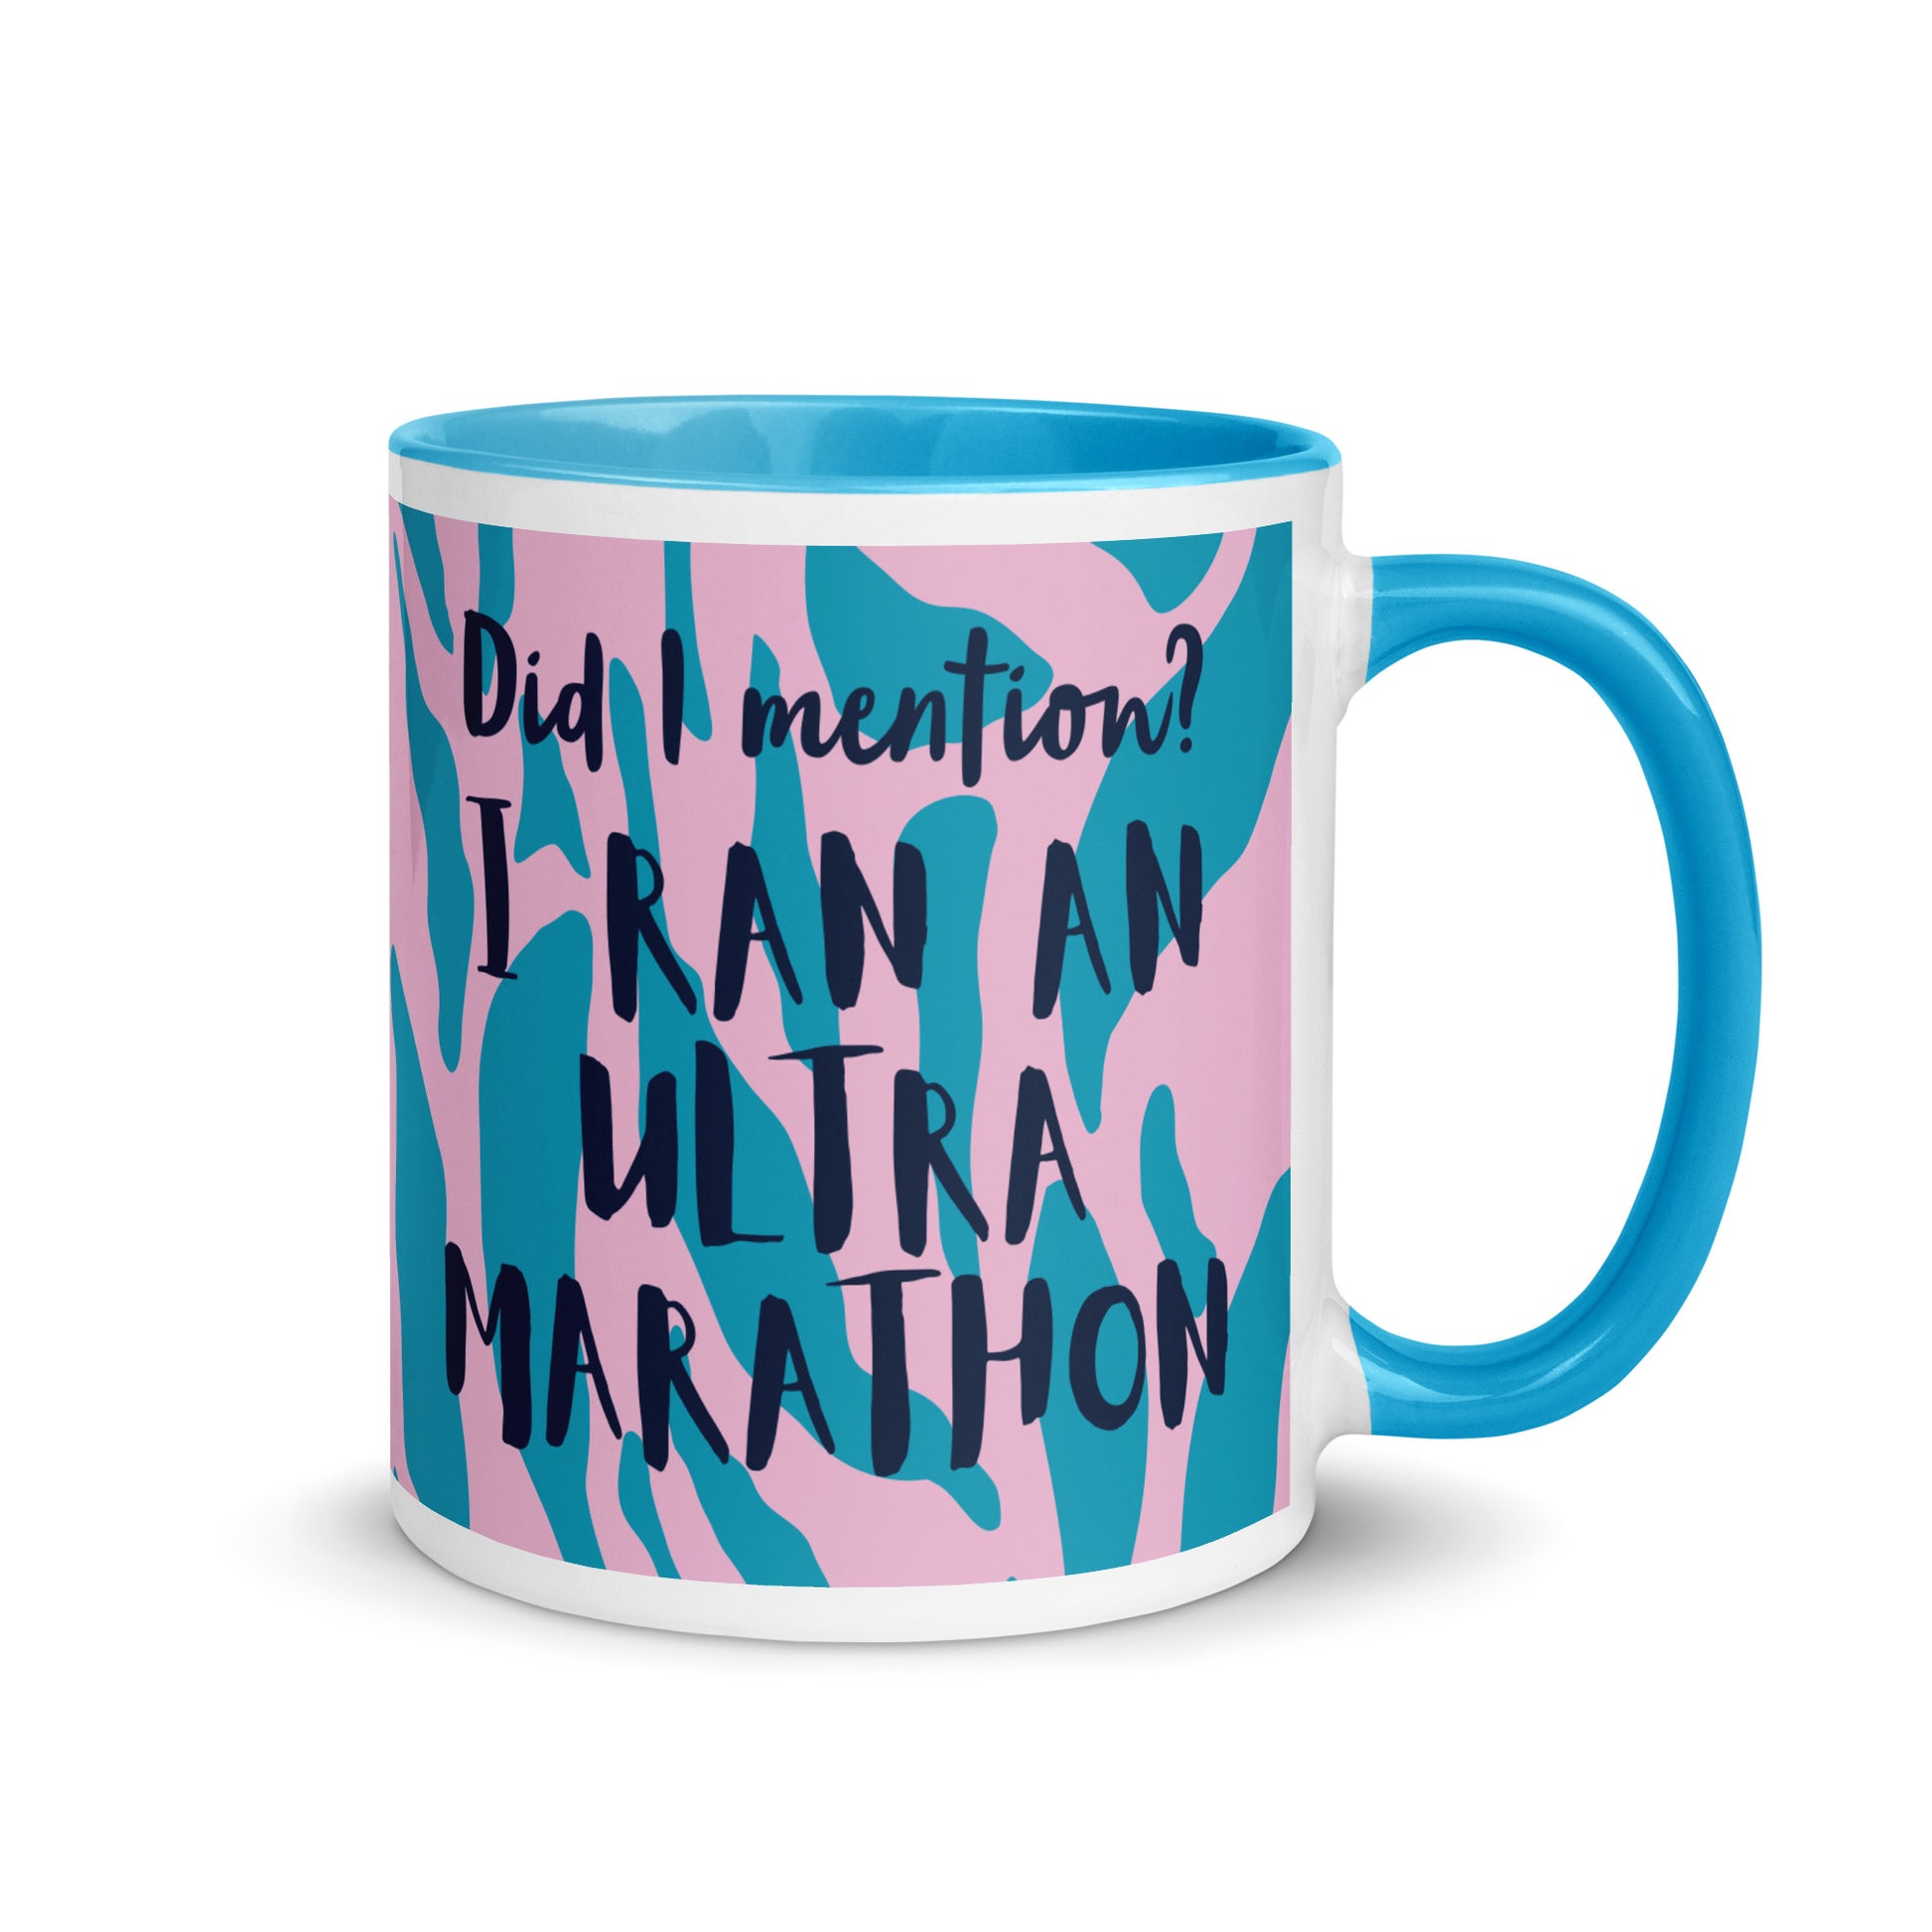 coffee mug with blue handle and rim, with the words did i mention? i ran an ultra marathon. a gift for people who have completed an ultra marathon